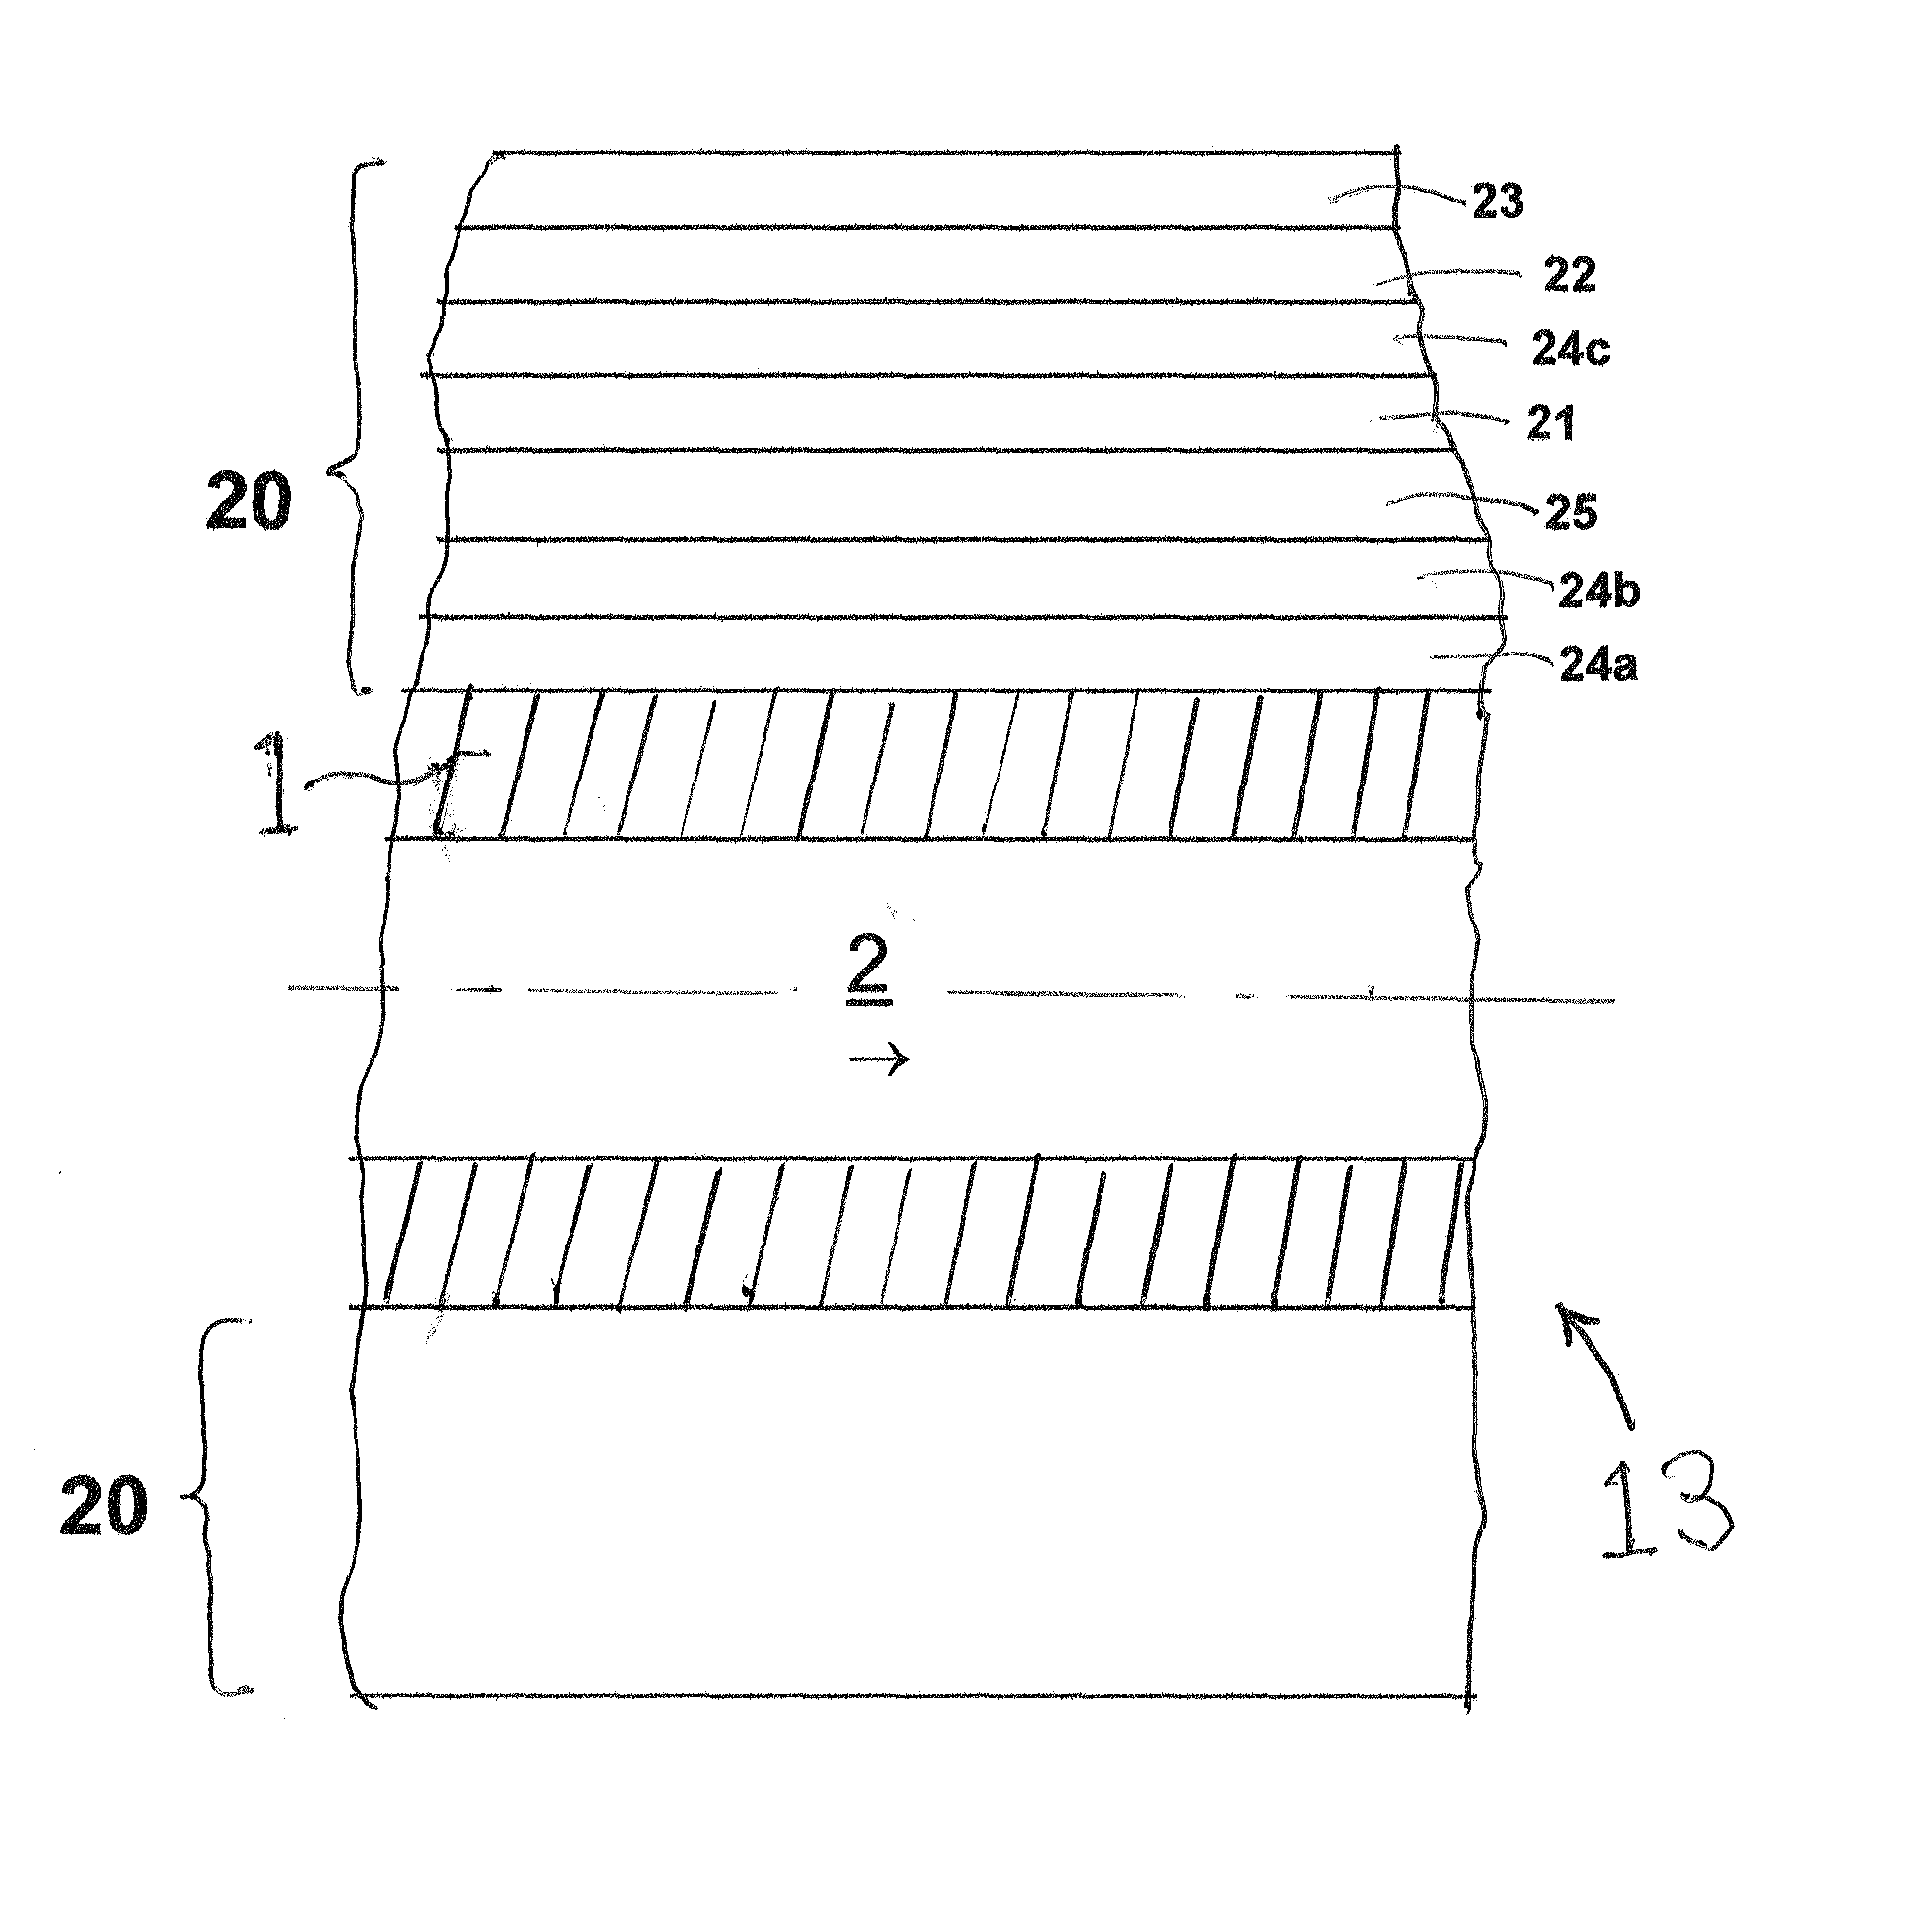 Radiation-selective absorber coating and absorber tube with radiation-selective absorber coating